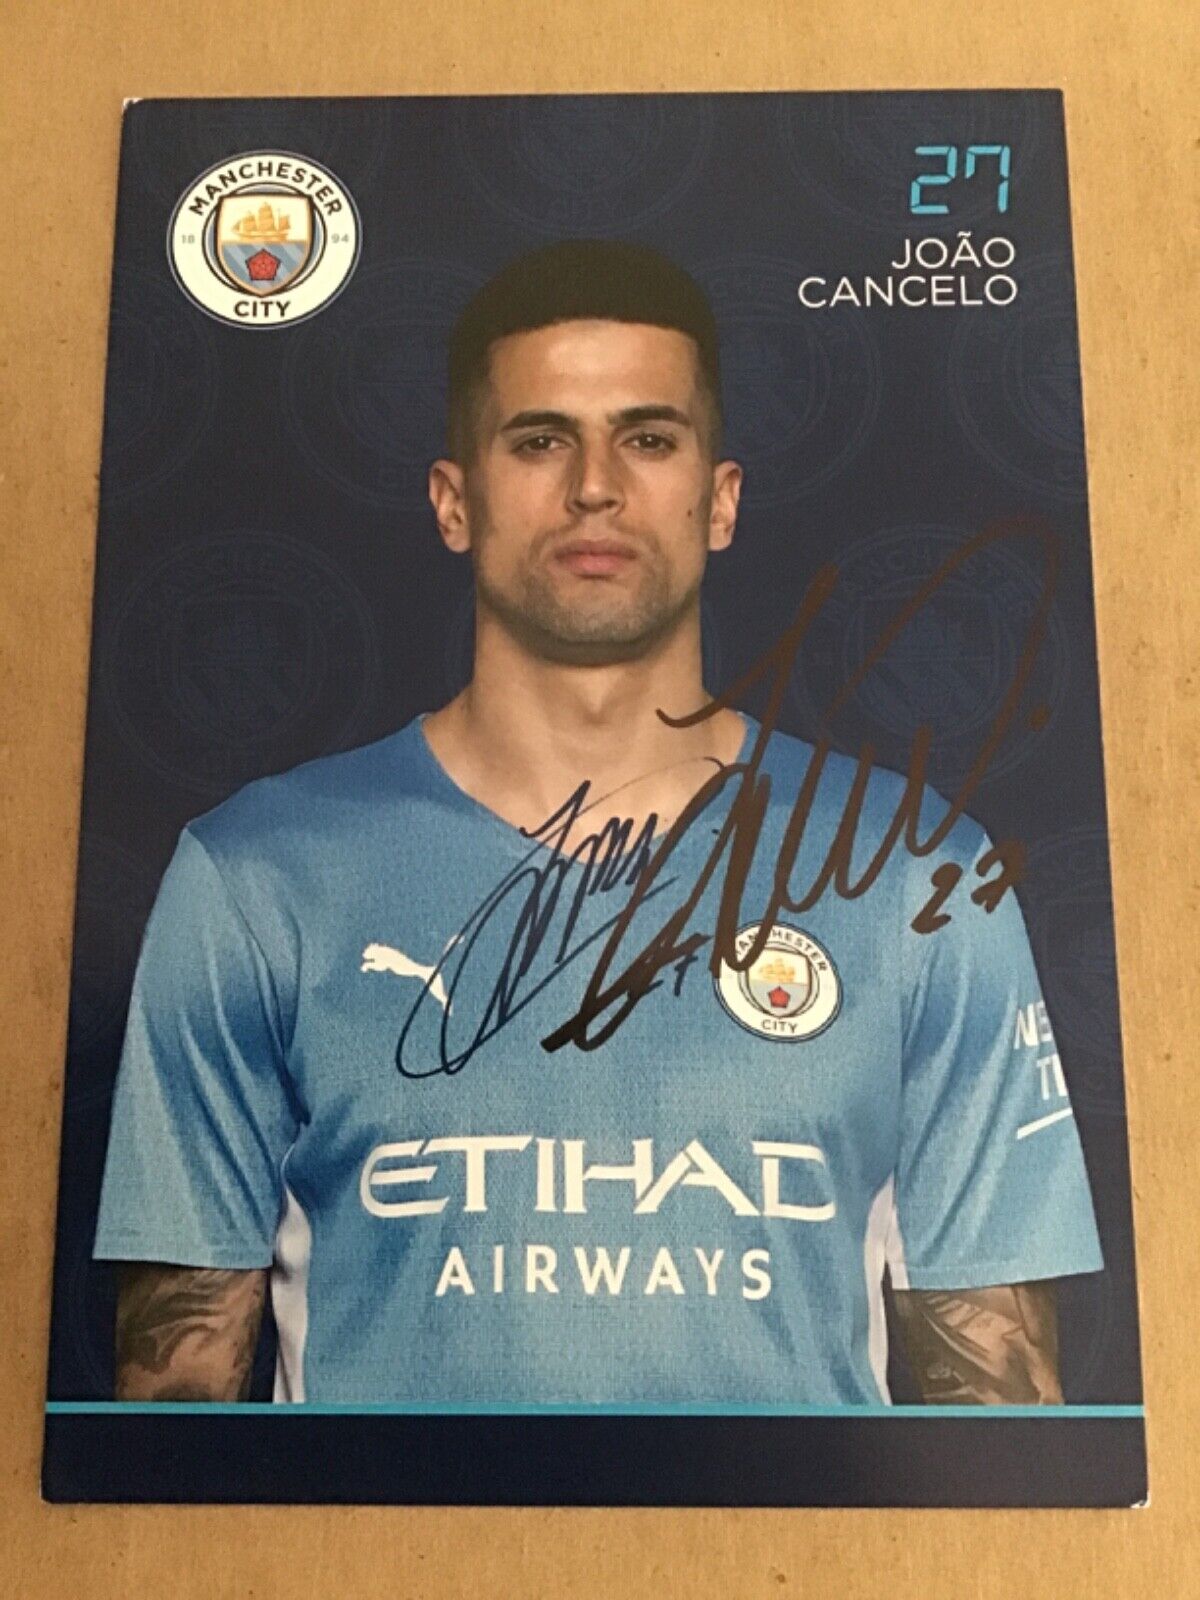 Joao Cancelo, Portugal 🇵🇹 Manchester City 2020/21 hand signed